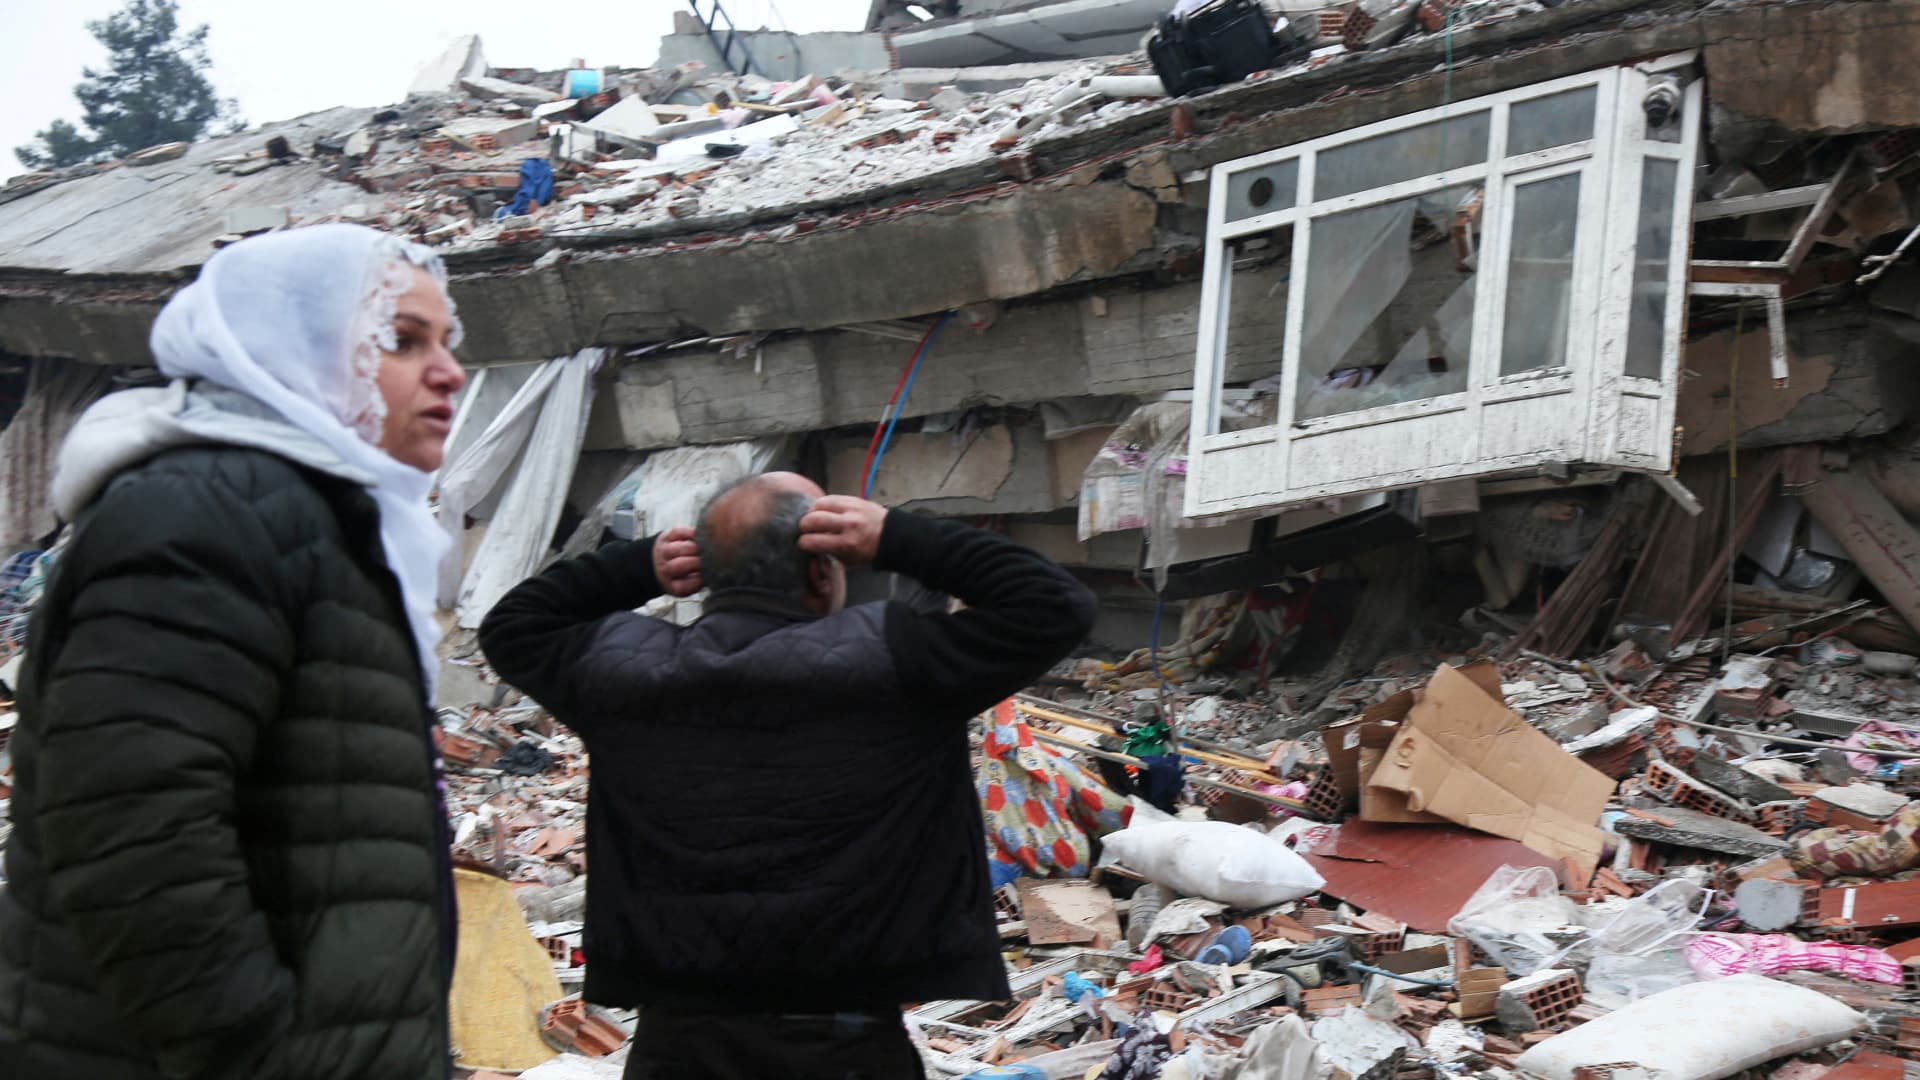 More than 3,000 dead as two massive earthquakes rock Turkey and Syria